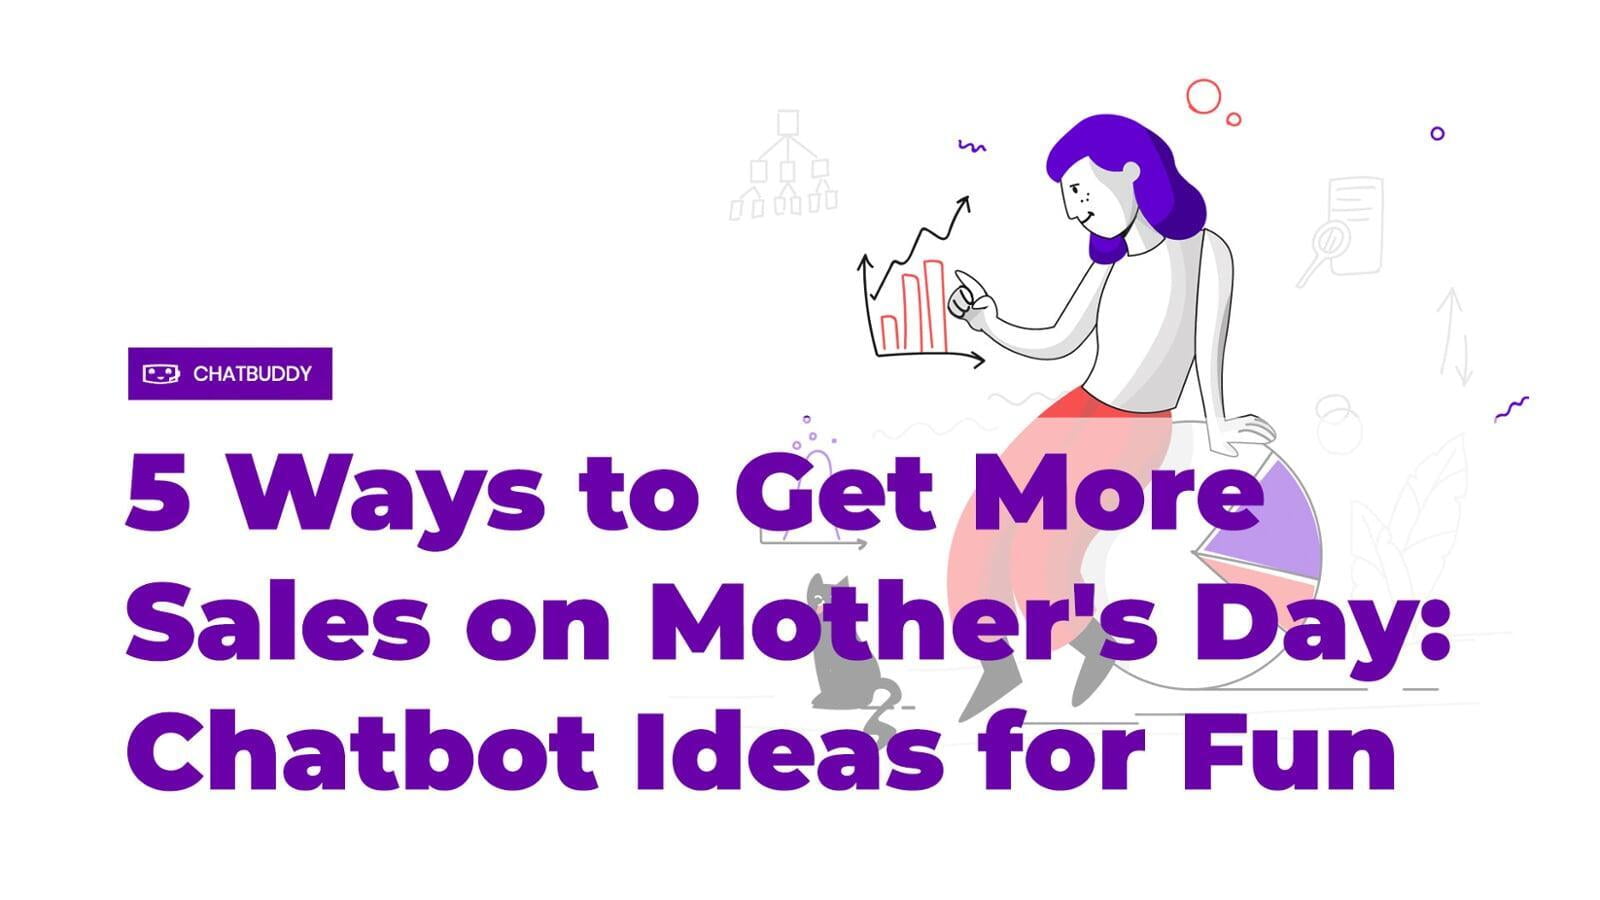 5 Ways to Get More Sales on Mother's Day: Chatbot Ideas for Fun